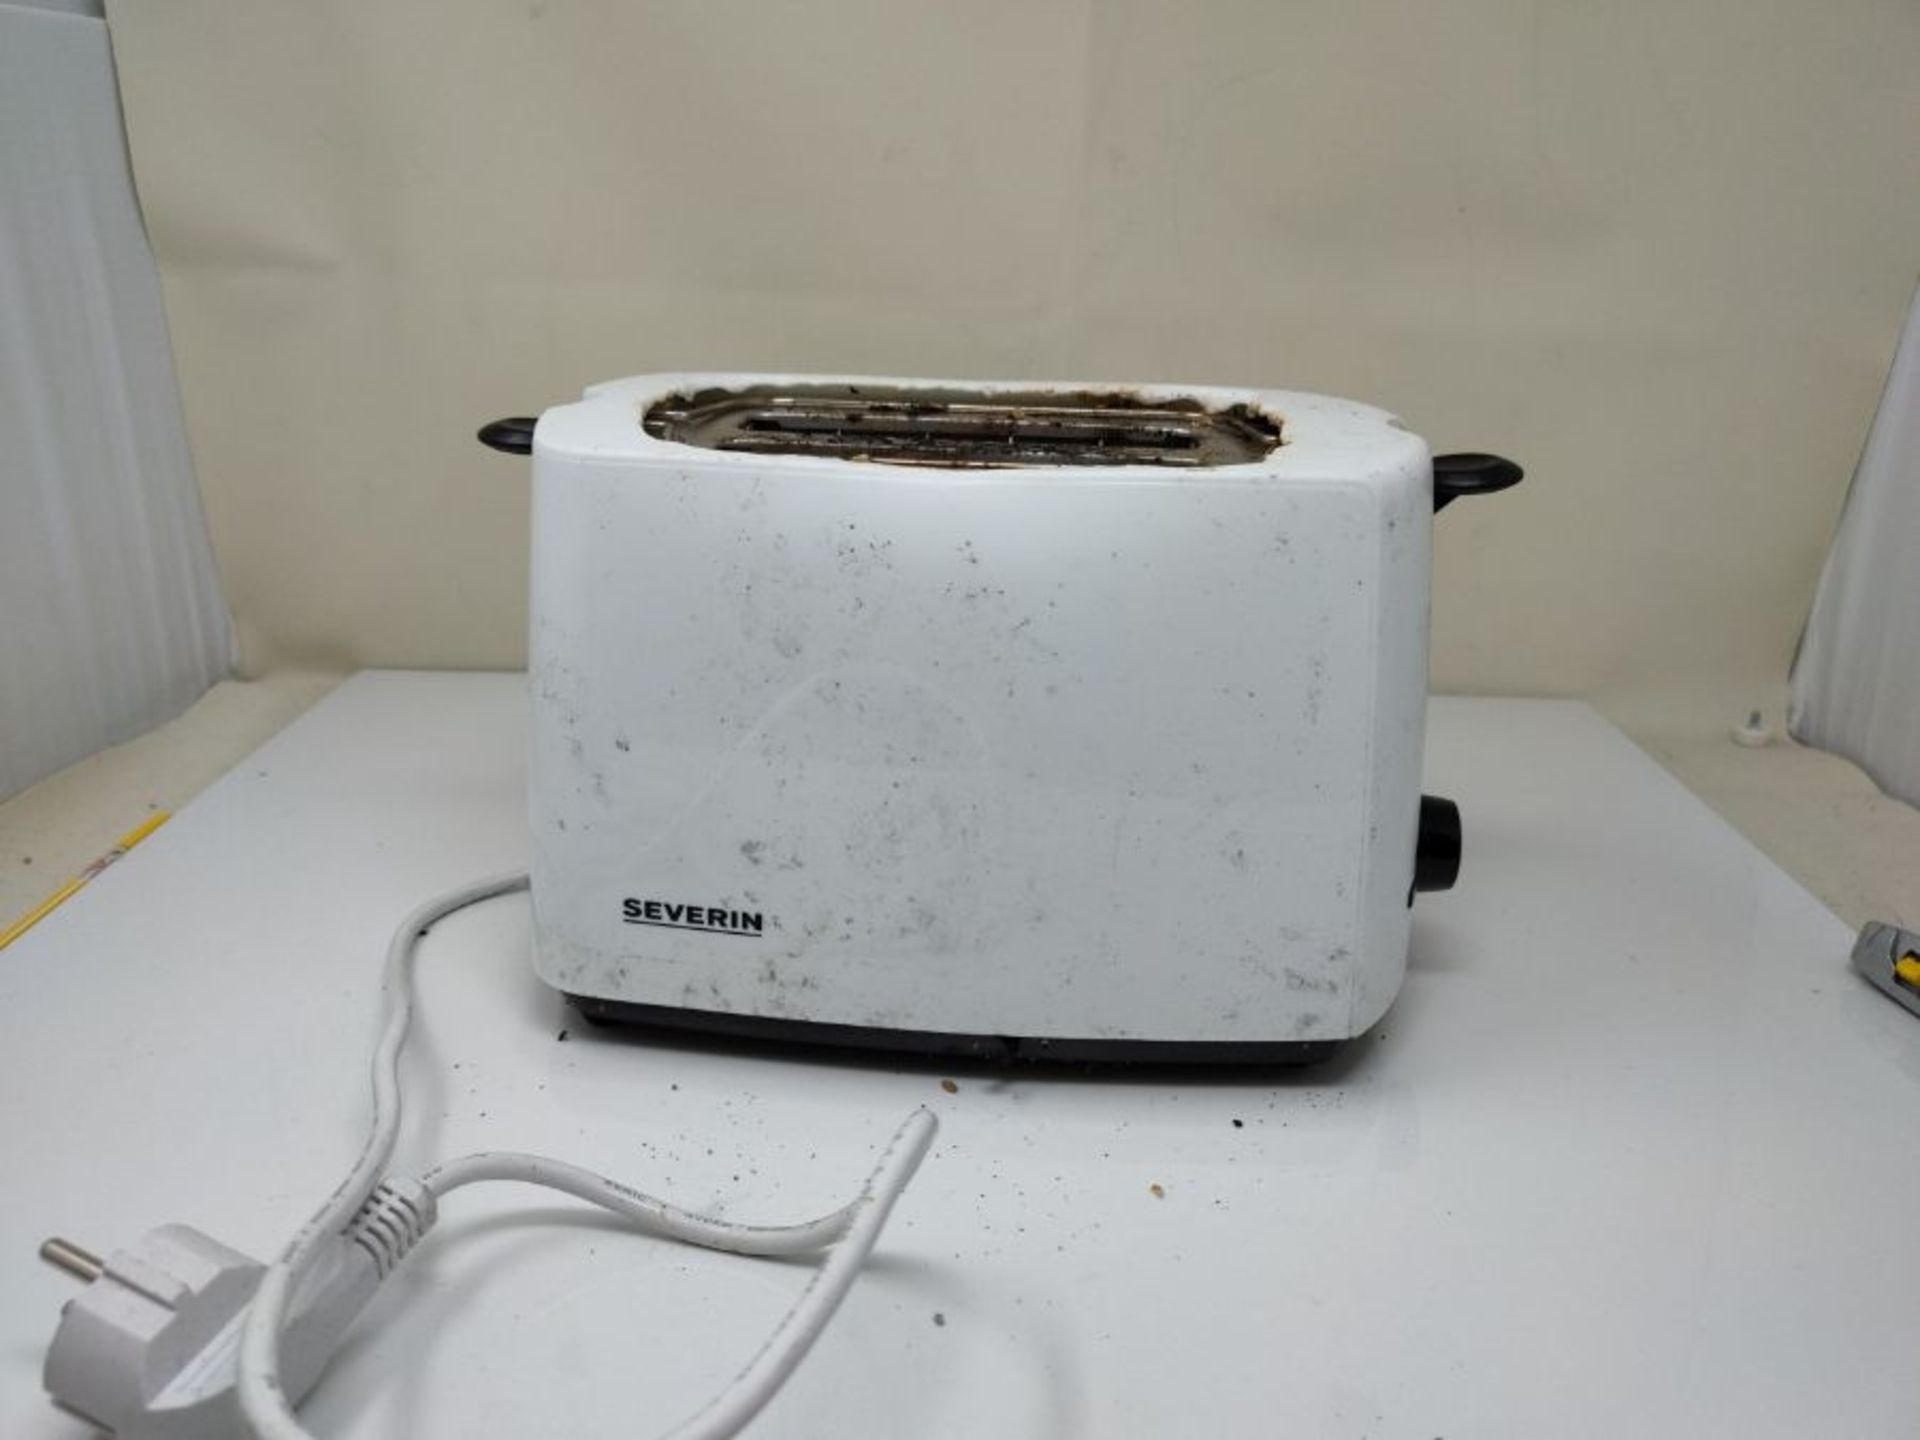 Severin Automatic toaster with 700 W of power 2286, white-black - Image 2 of 2